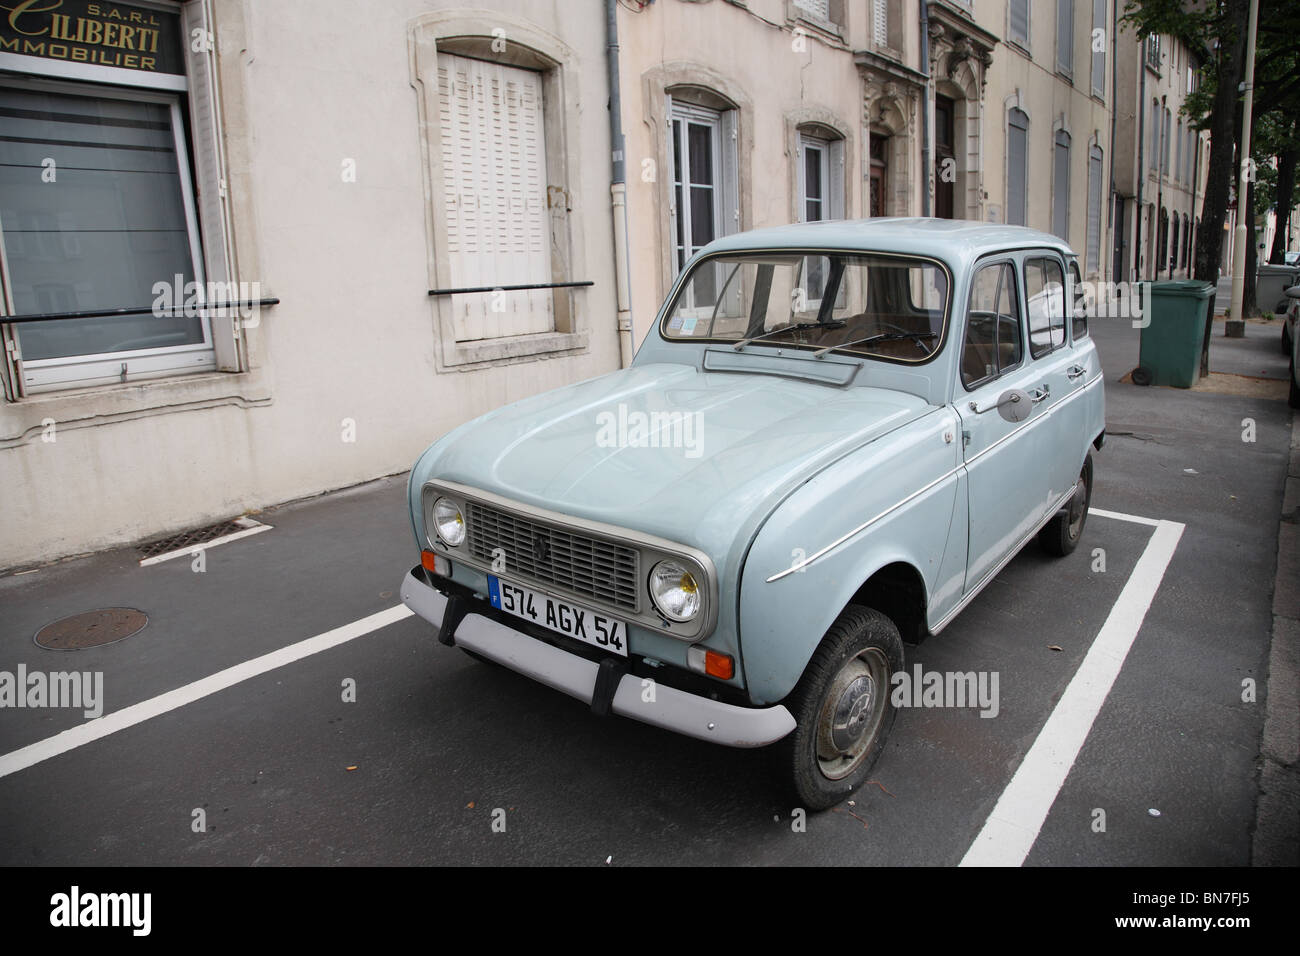 A classic: Renault R4, Nancy, France Stock Photo